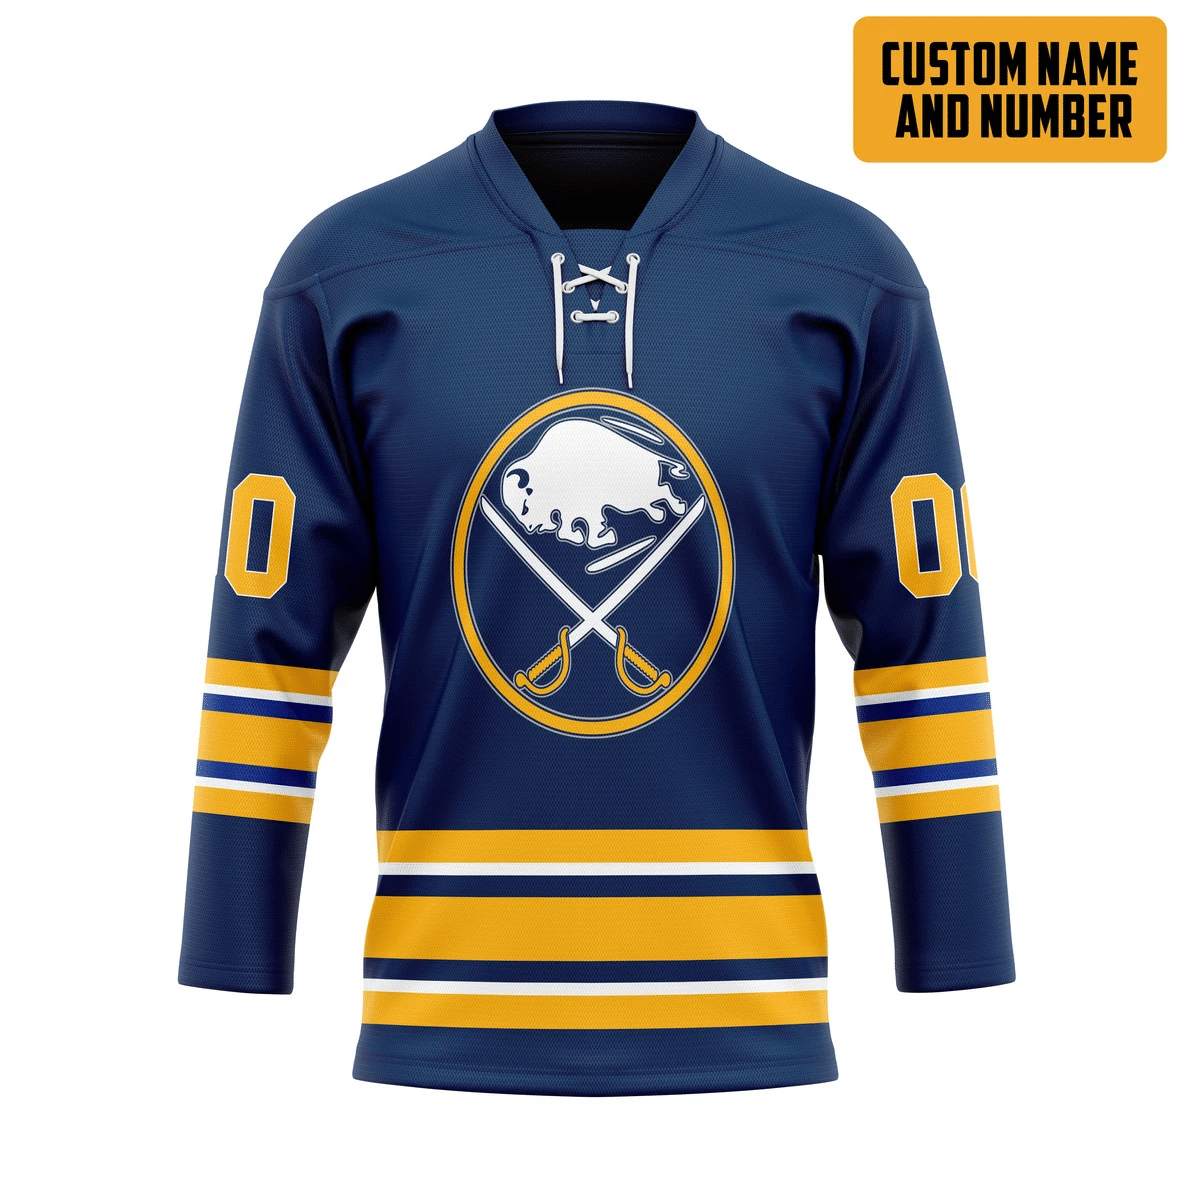 The style of a hockey jersey should match your personality. 87